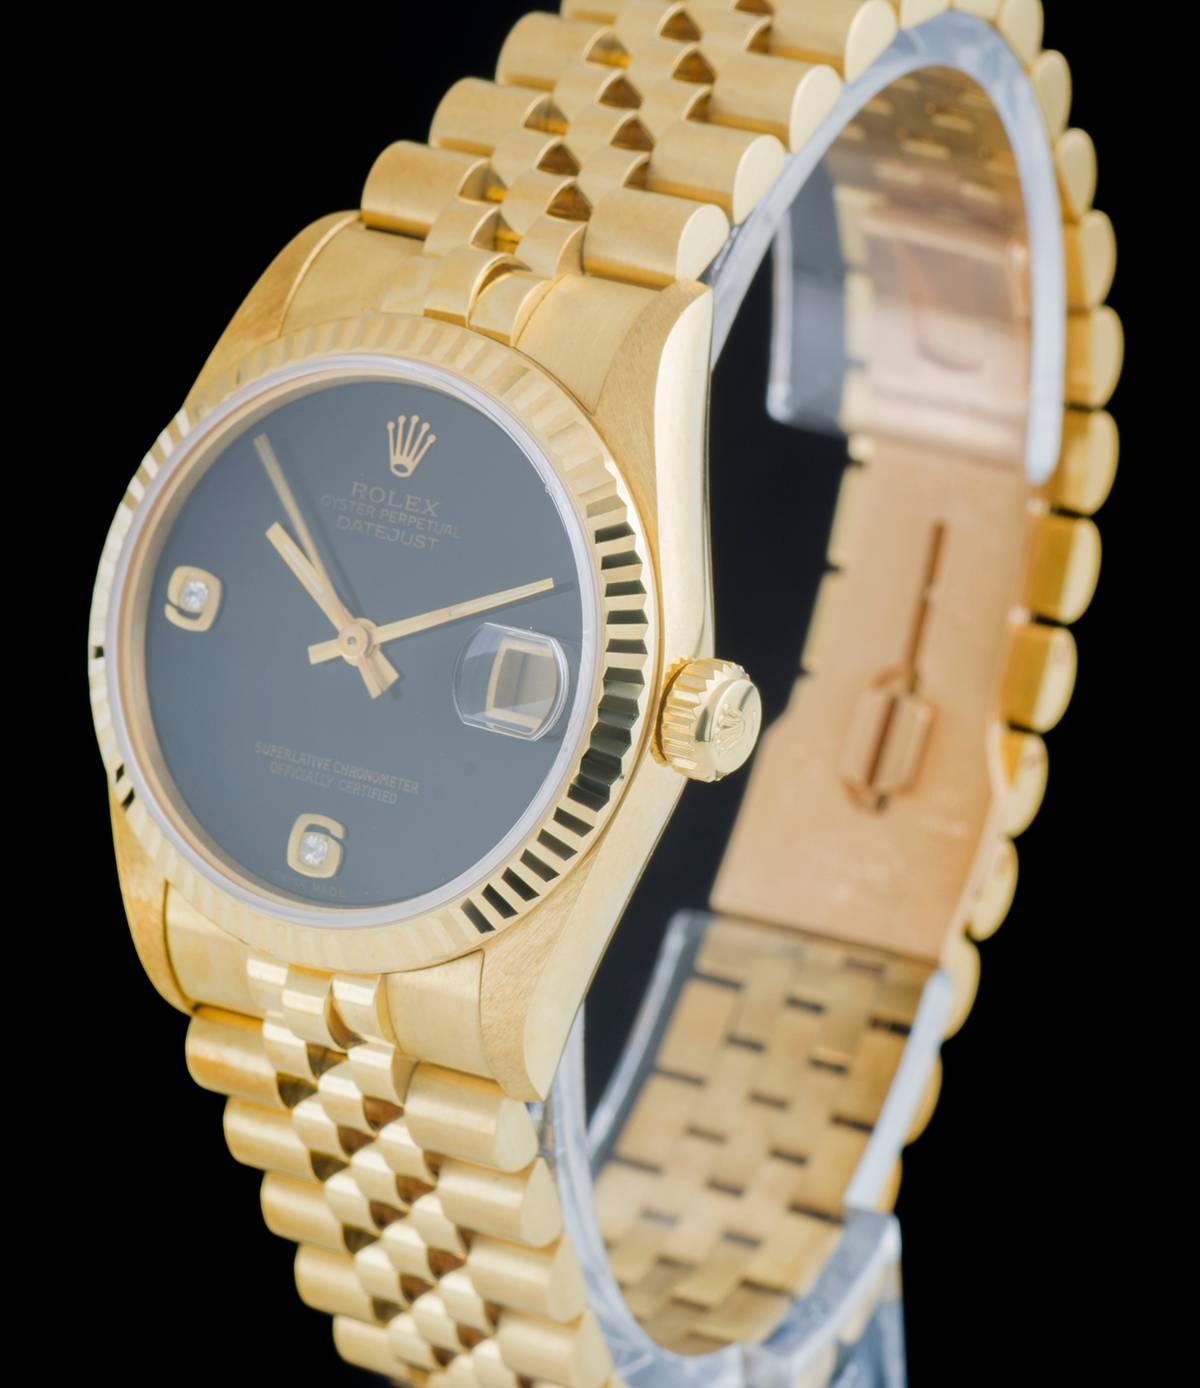 An Unworn 18k Yellow Gold Oyster Perpetual Datejust NOS Mid-Size Wristwatch, rare onyx dial with applied arabic numbers 6 and 9 each set with a round brilliant cut diamond, date at 3 0'clock, a fixed 18k yellow gold fluted bezel, an 18k yellow gold